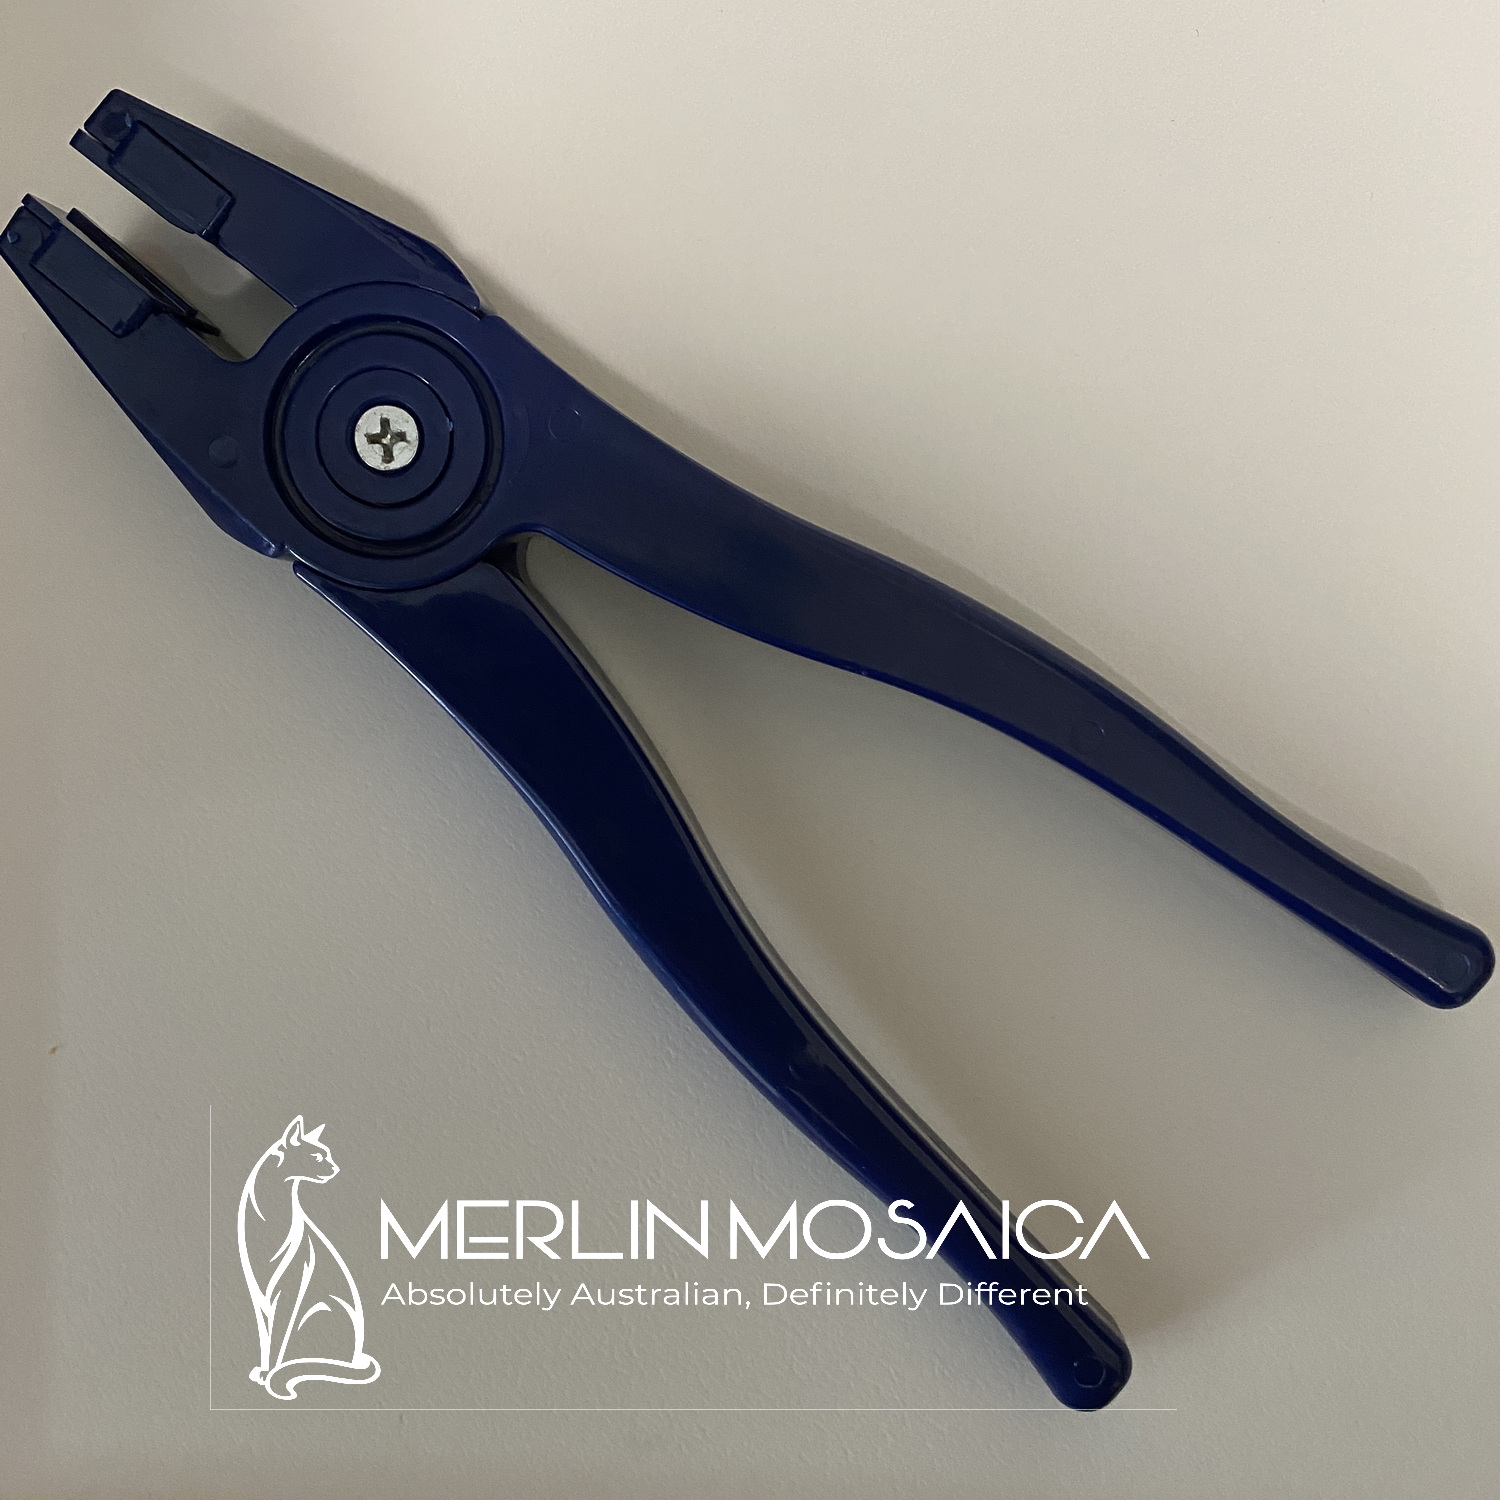 Lightweight Plastic Running Pliers for Stained Glass Tile Breaking